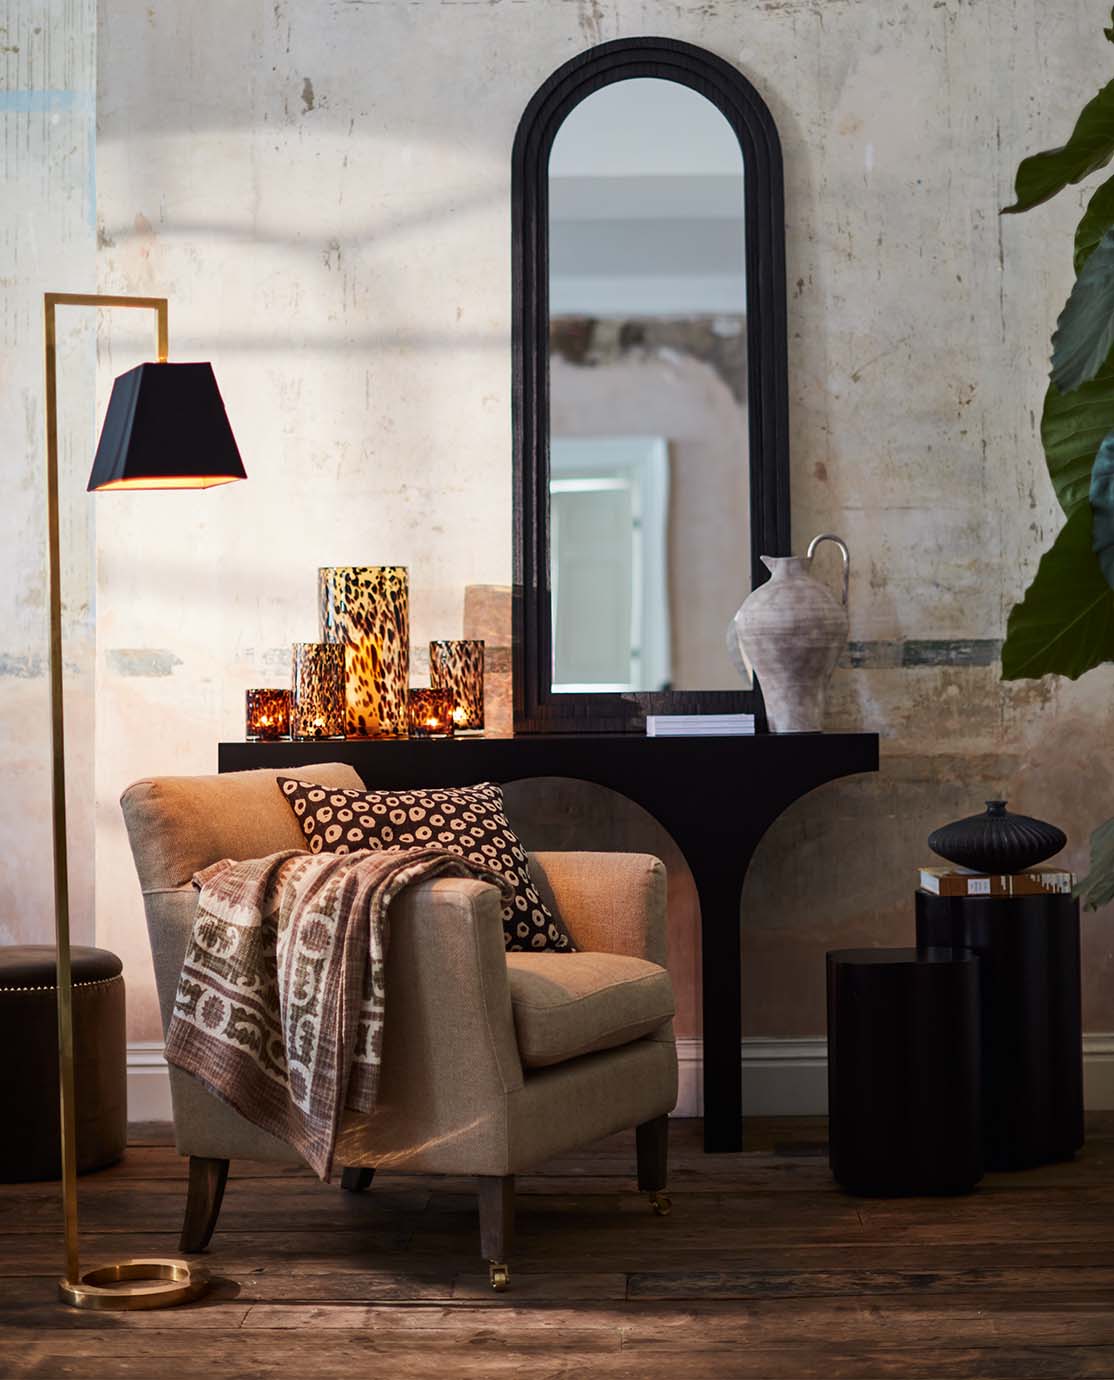 A cosy sitting room corner, with a sculptural gold floor lamp, beige armchair and tortoiseshell candles.